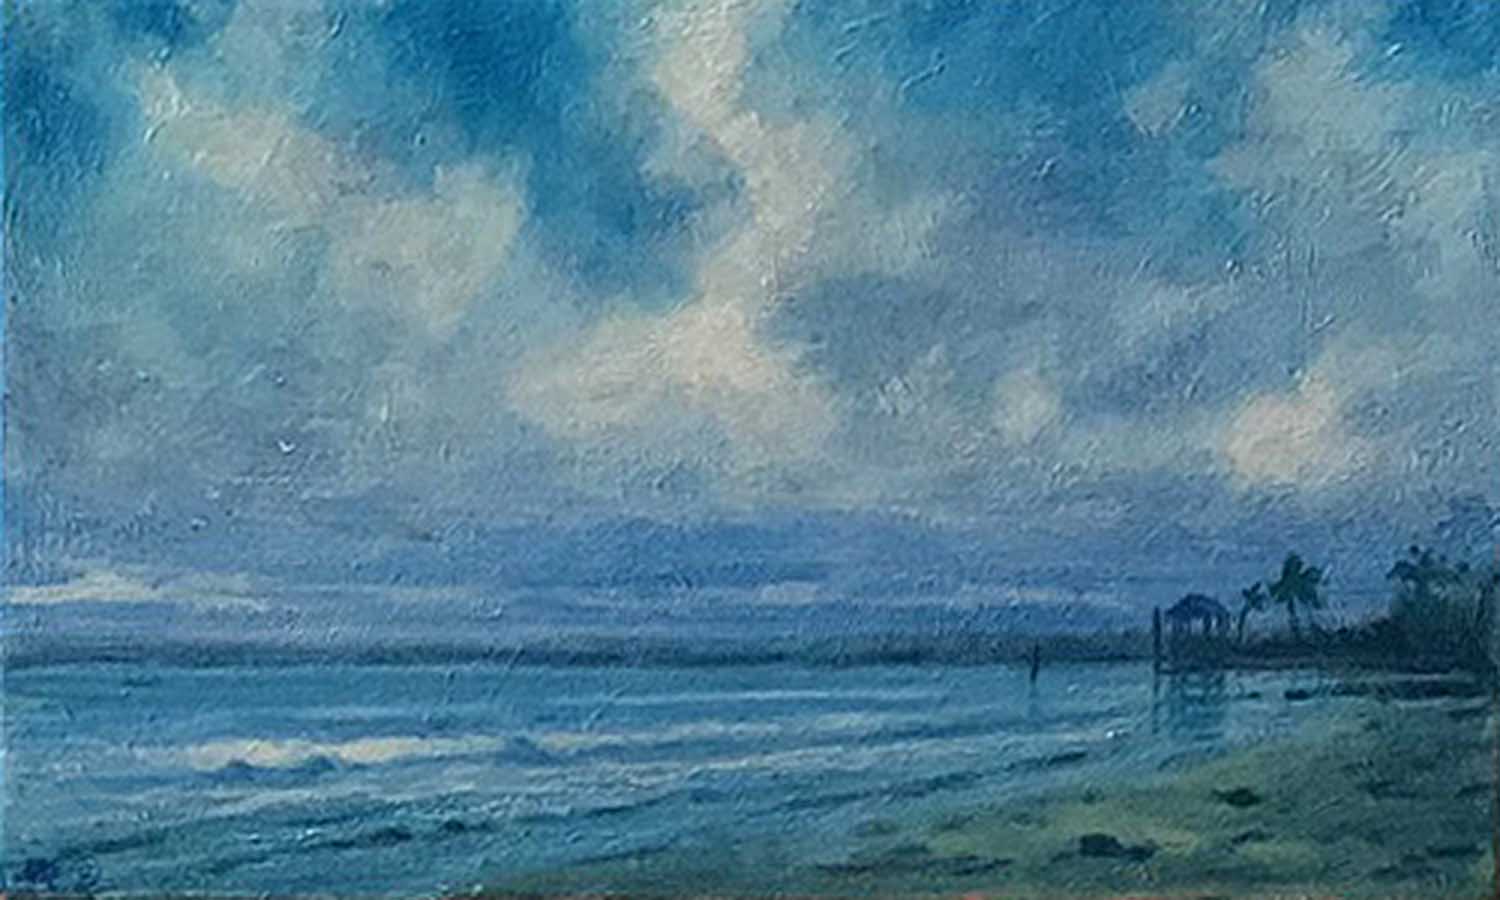 In The Channel, TC. Seascape painting by Derek Hare